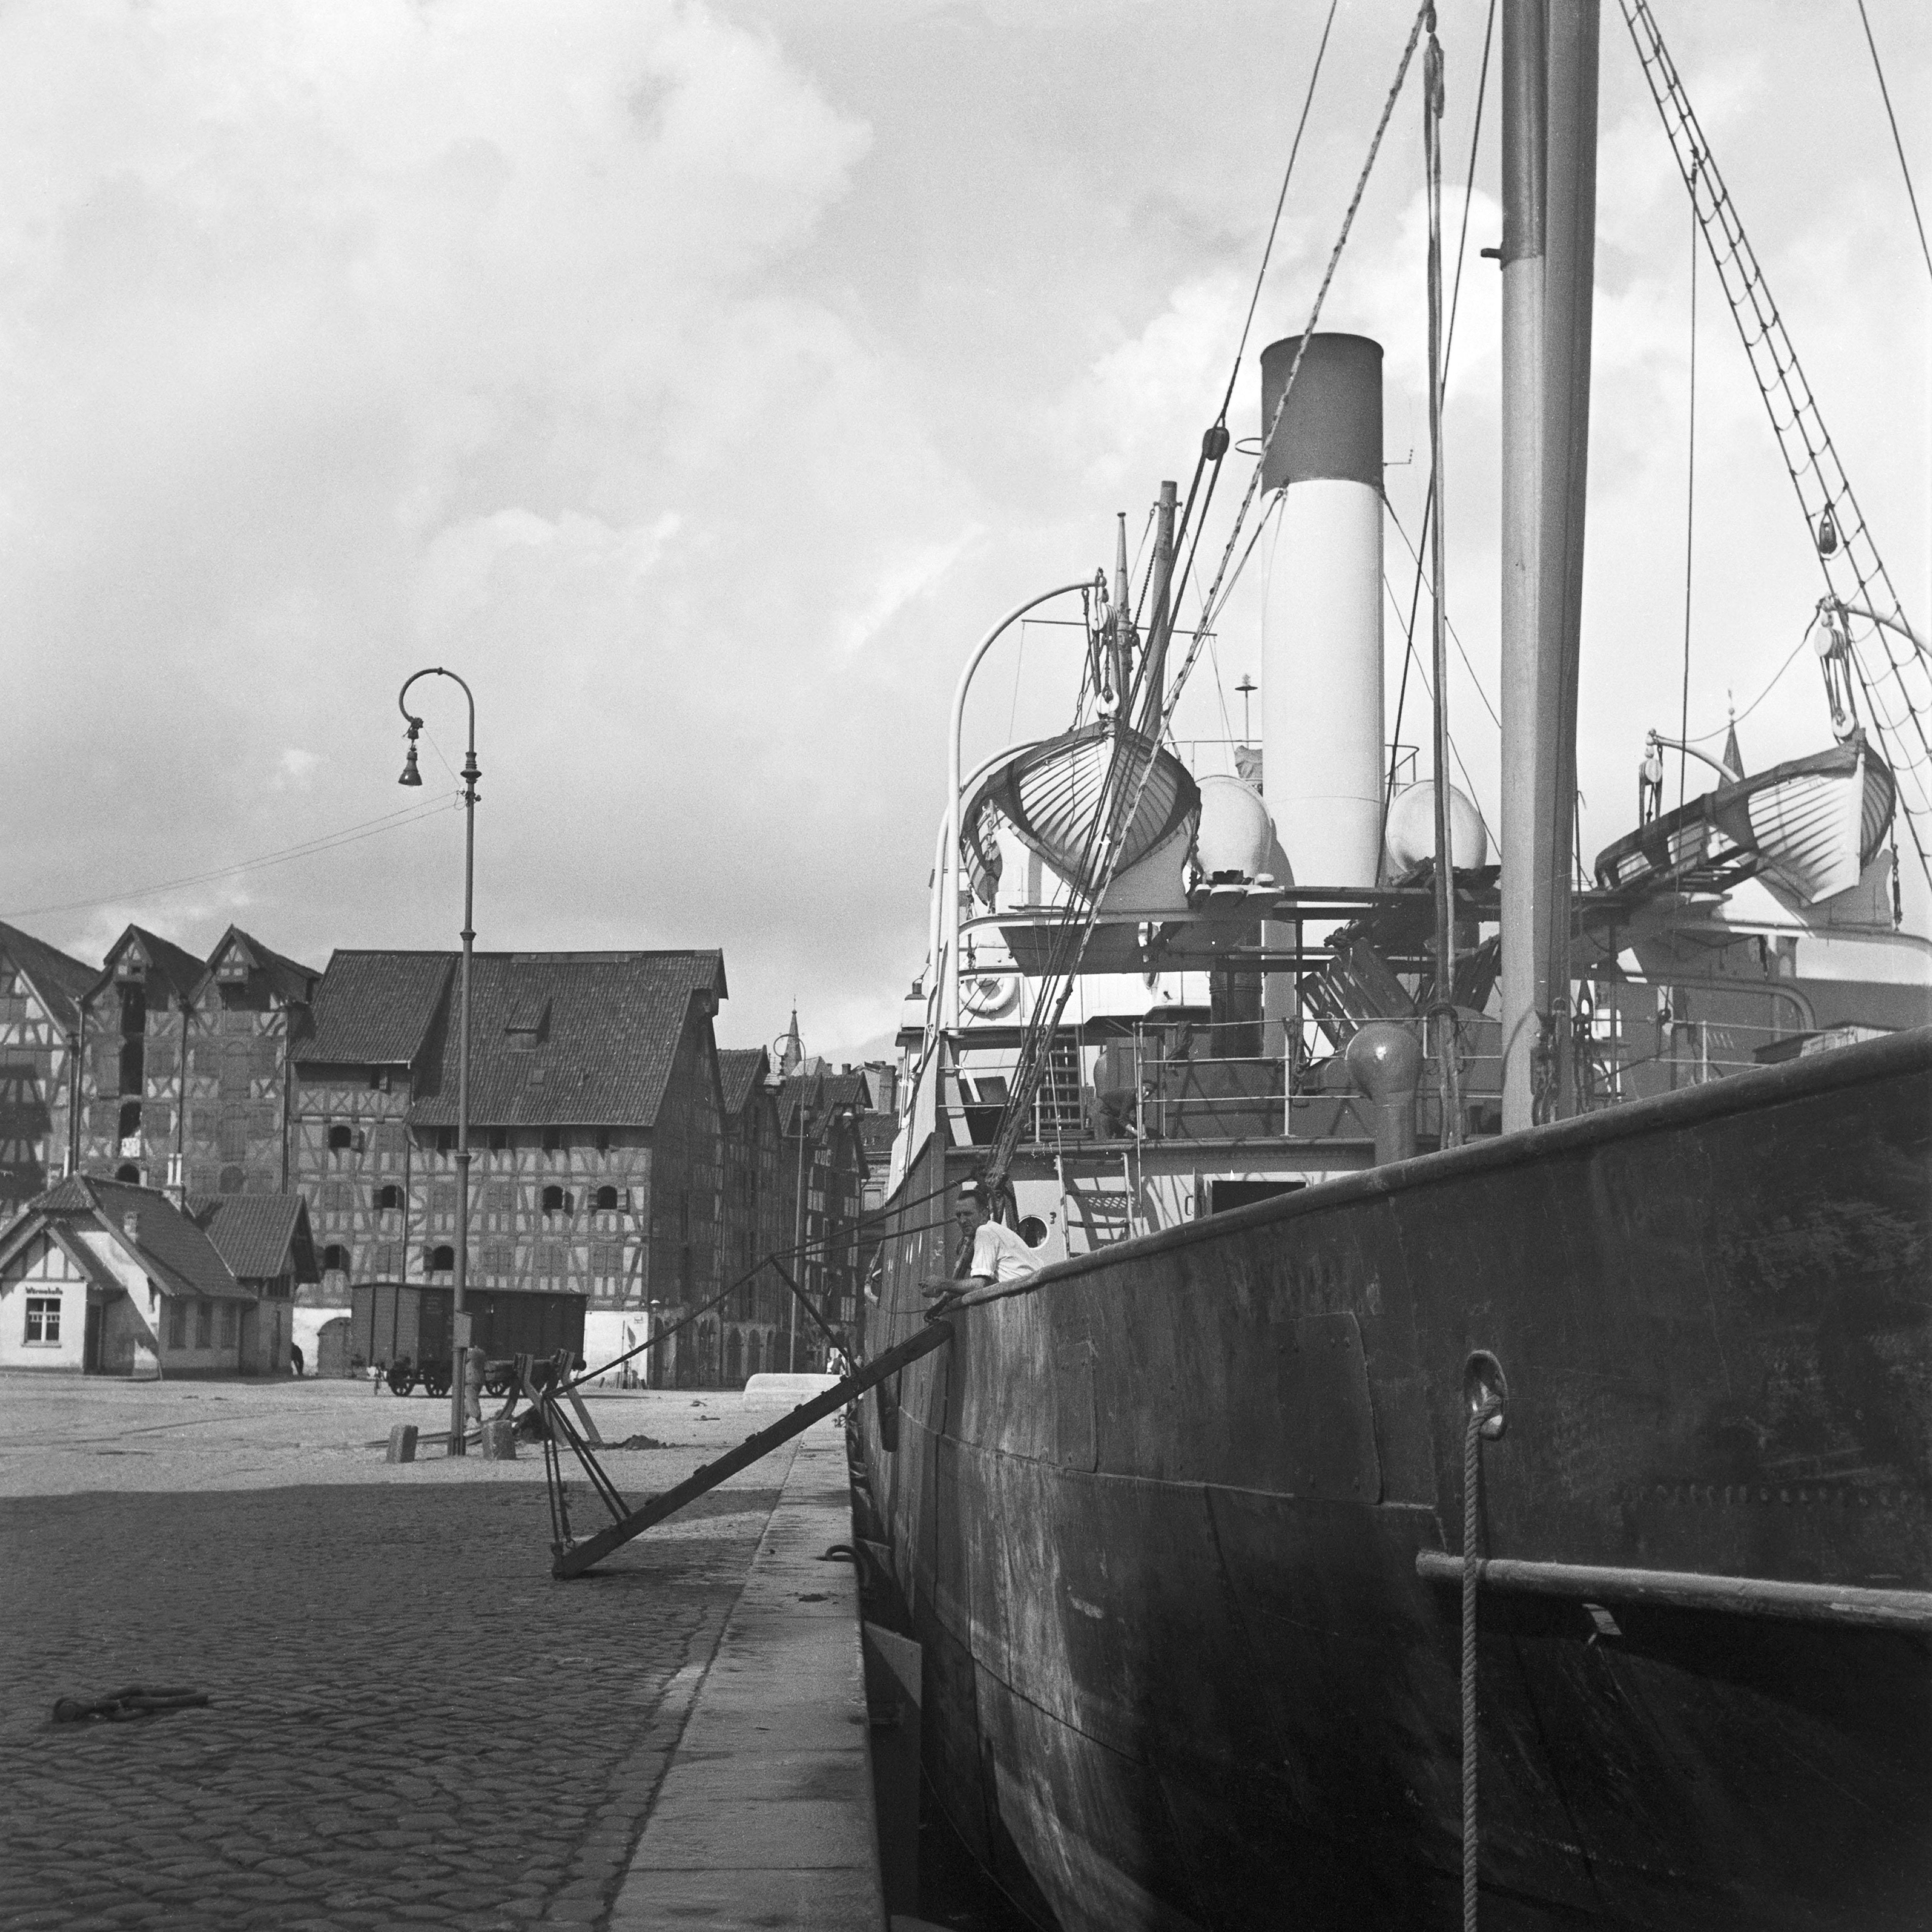 Karl Heinrich Lämmel Black and White Photograph - Ships at Koenigsberg harbor in East Prussia, Germany 1937 Printed Later